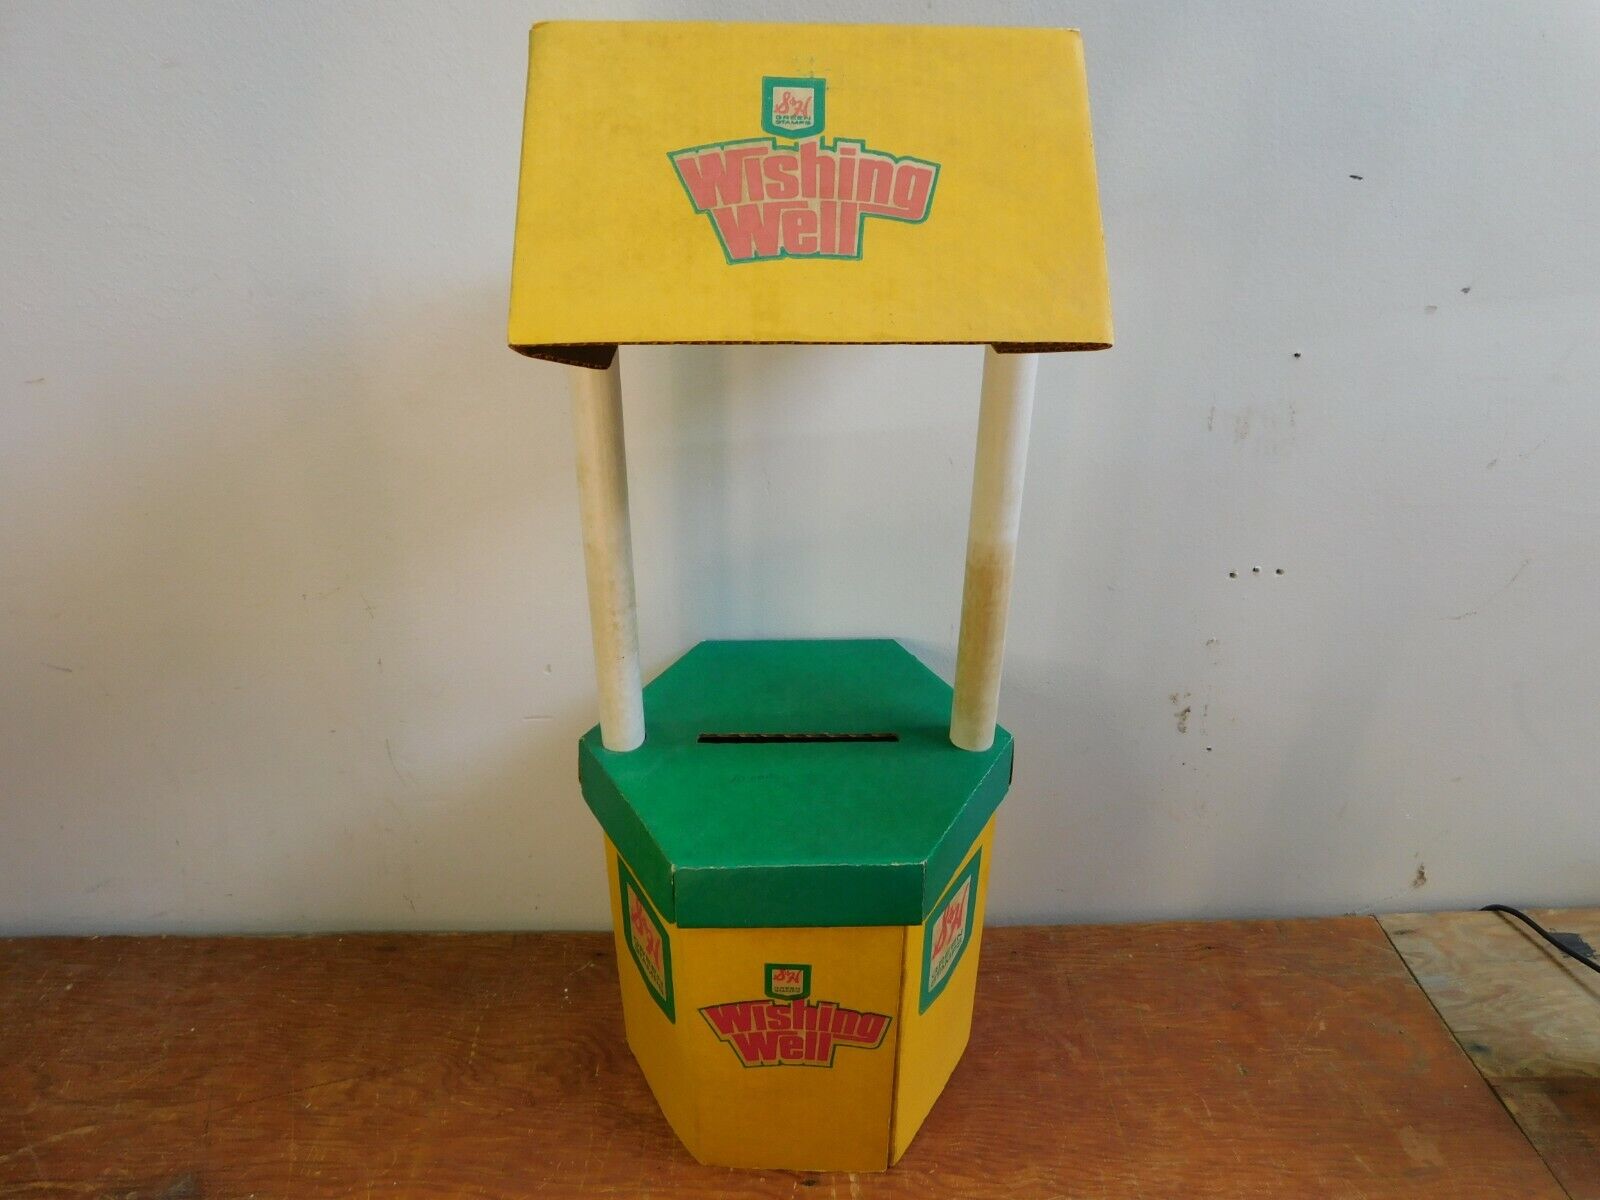 Vintage S&H Green Stamps Cardboard Wishing Well Store Display Good Condition 